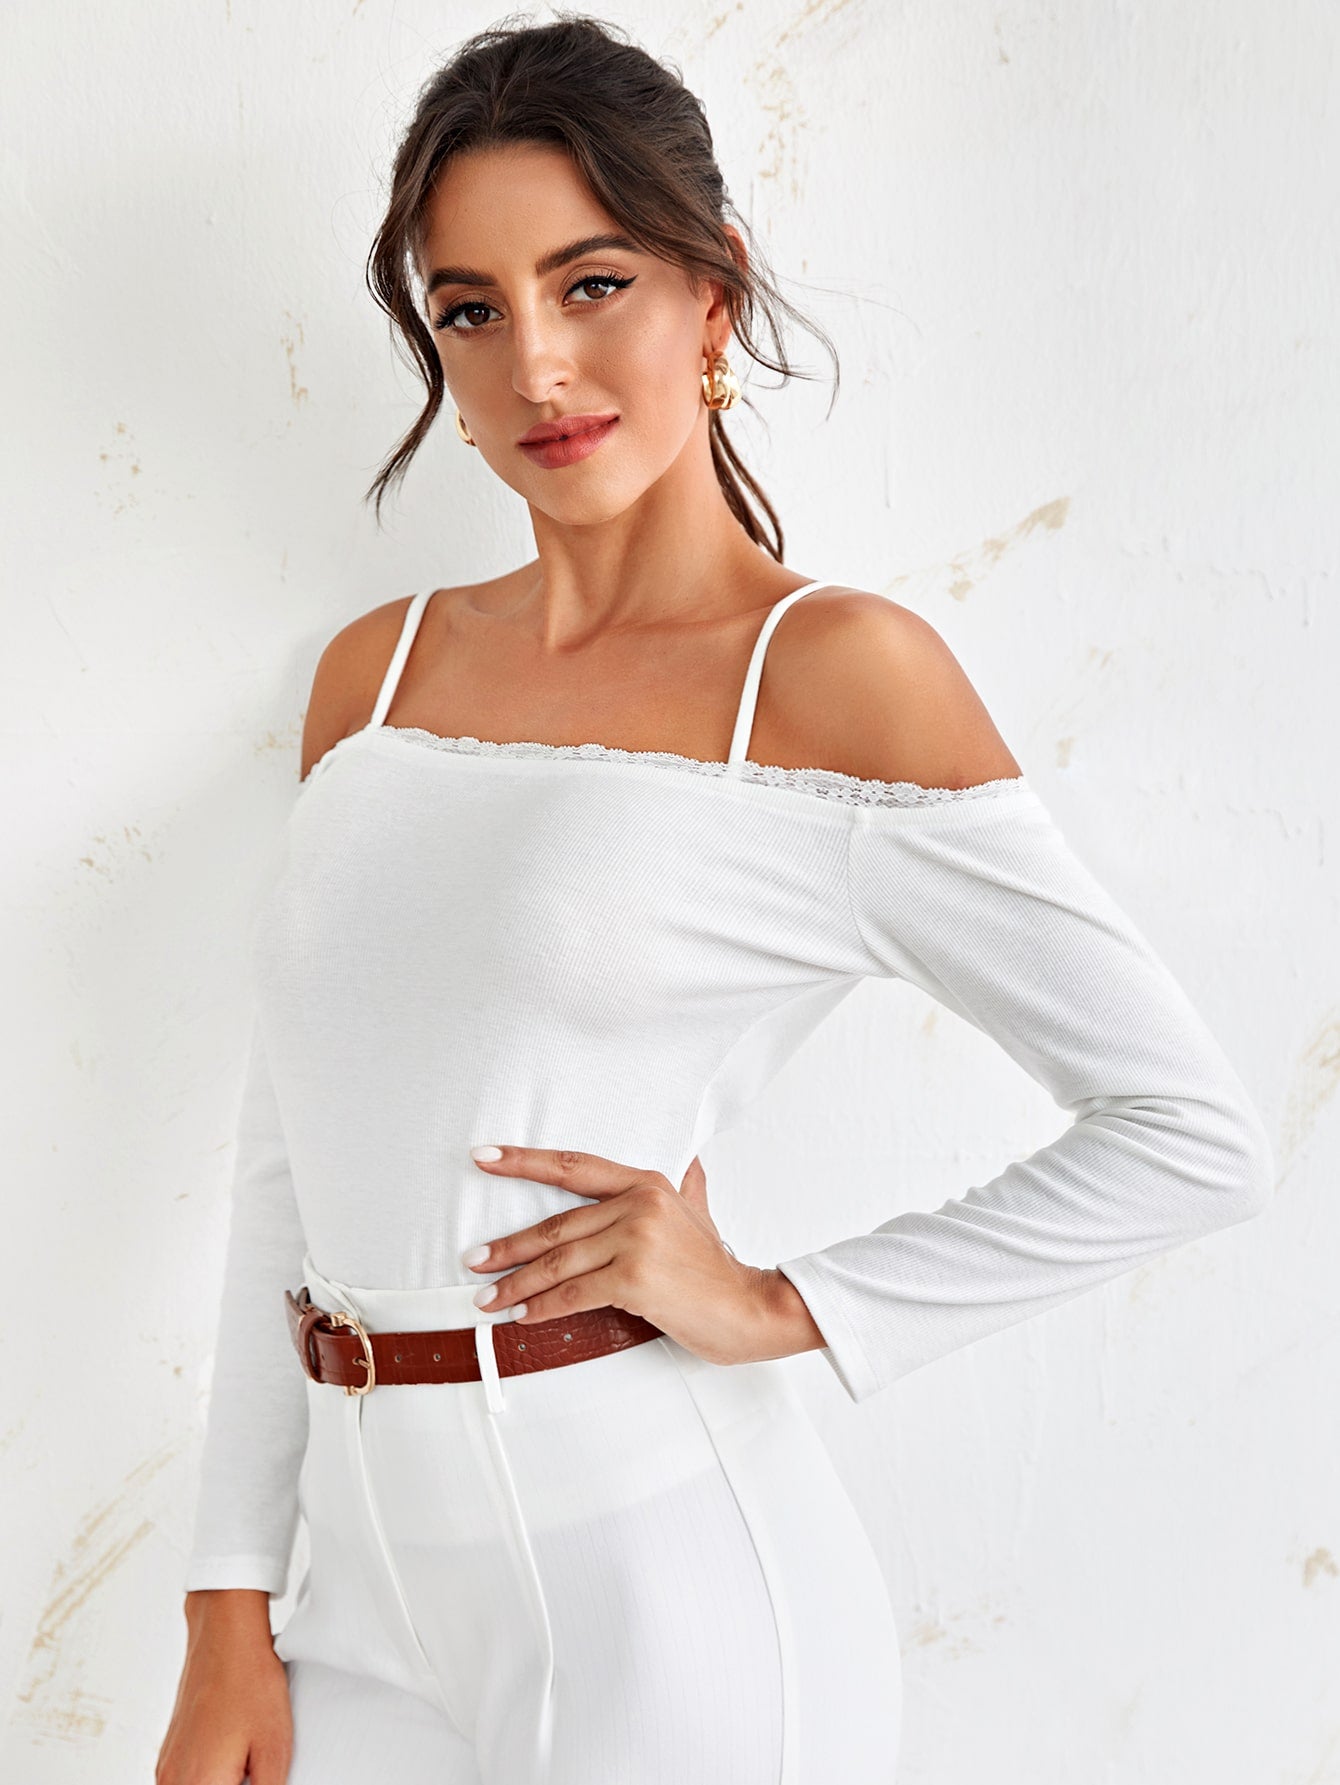 Contrast Lace Cold Shoulder Tee